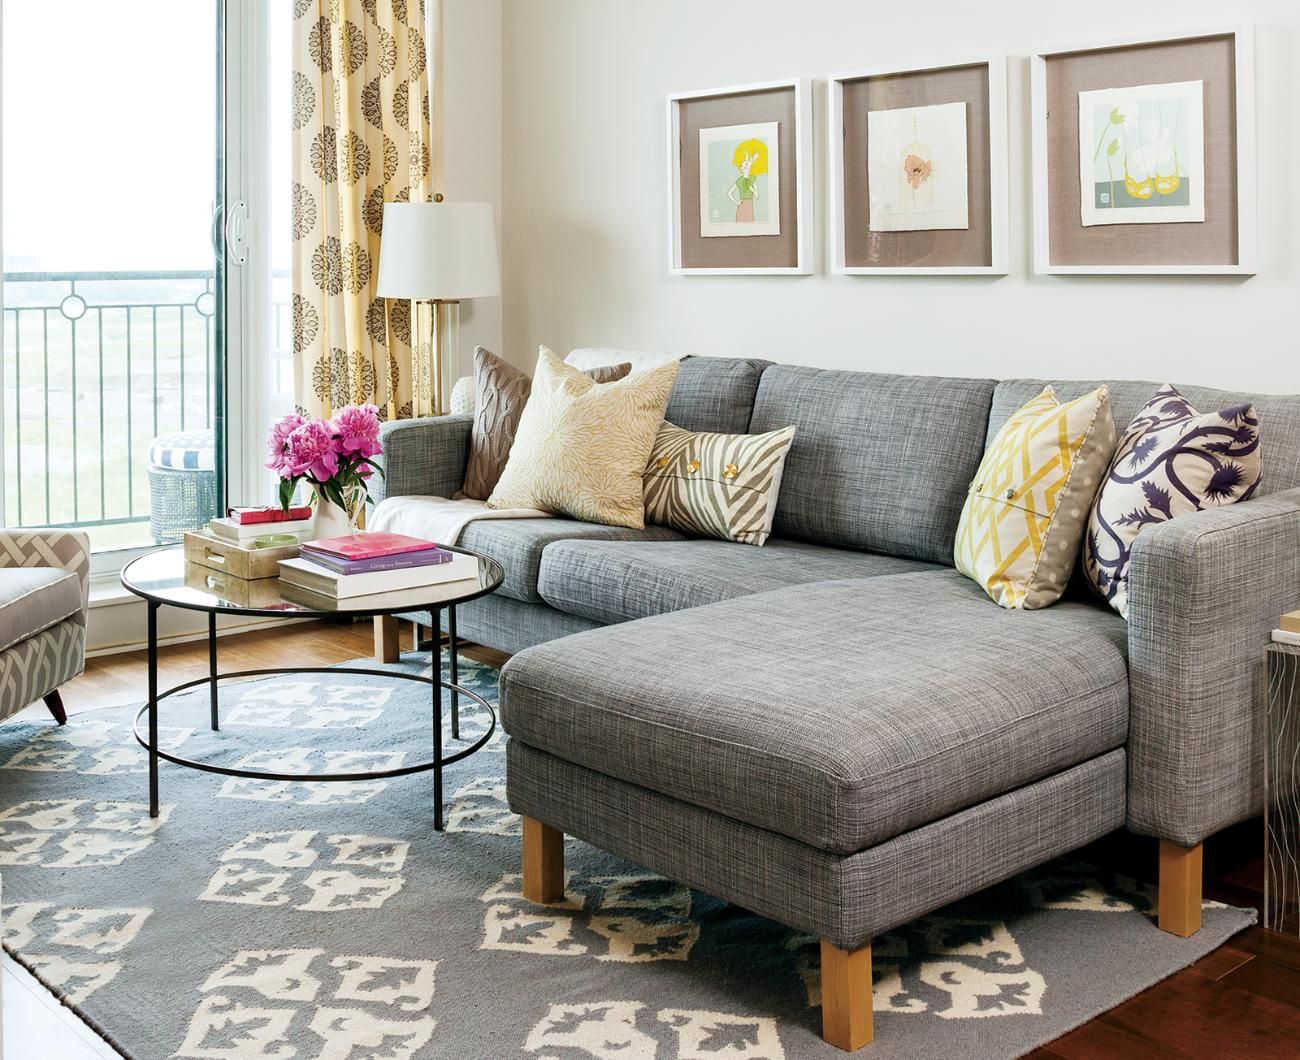 Gold and grey living room—Gold and grey combine beautifully in the airy living  room.